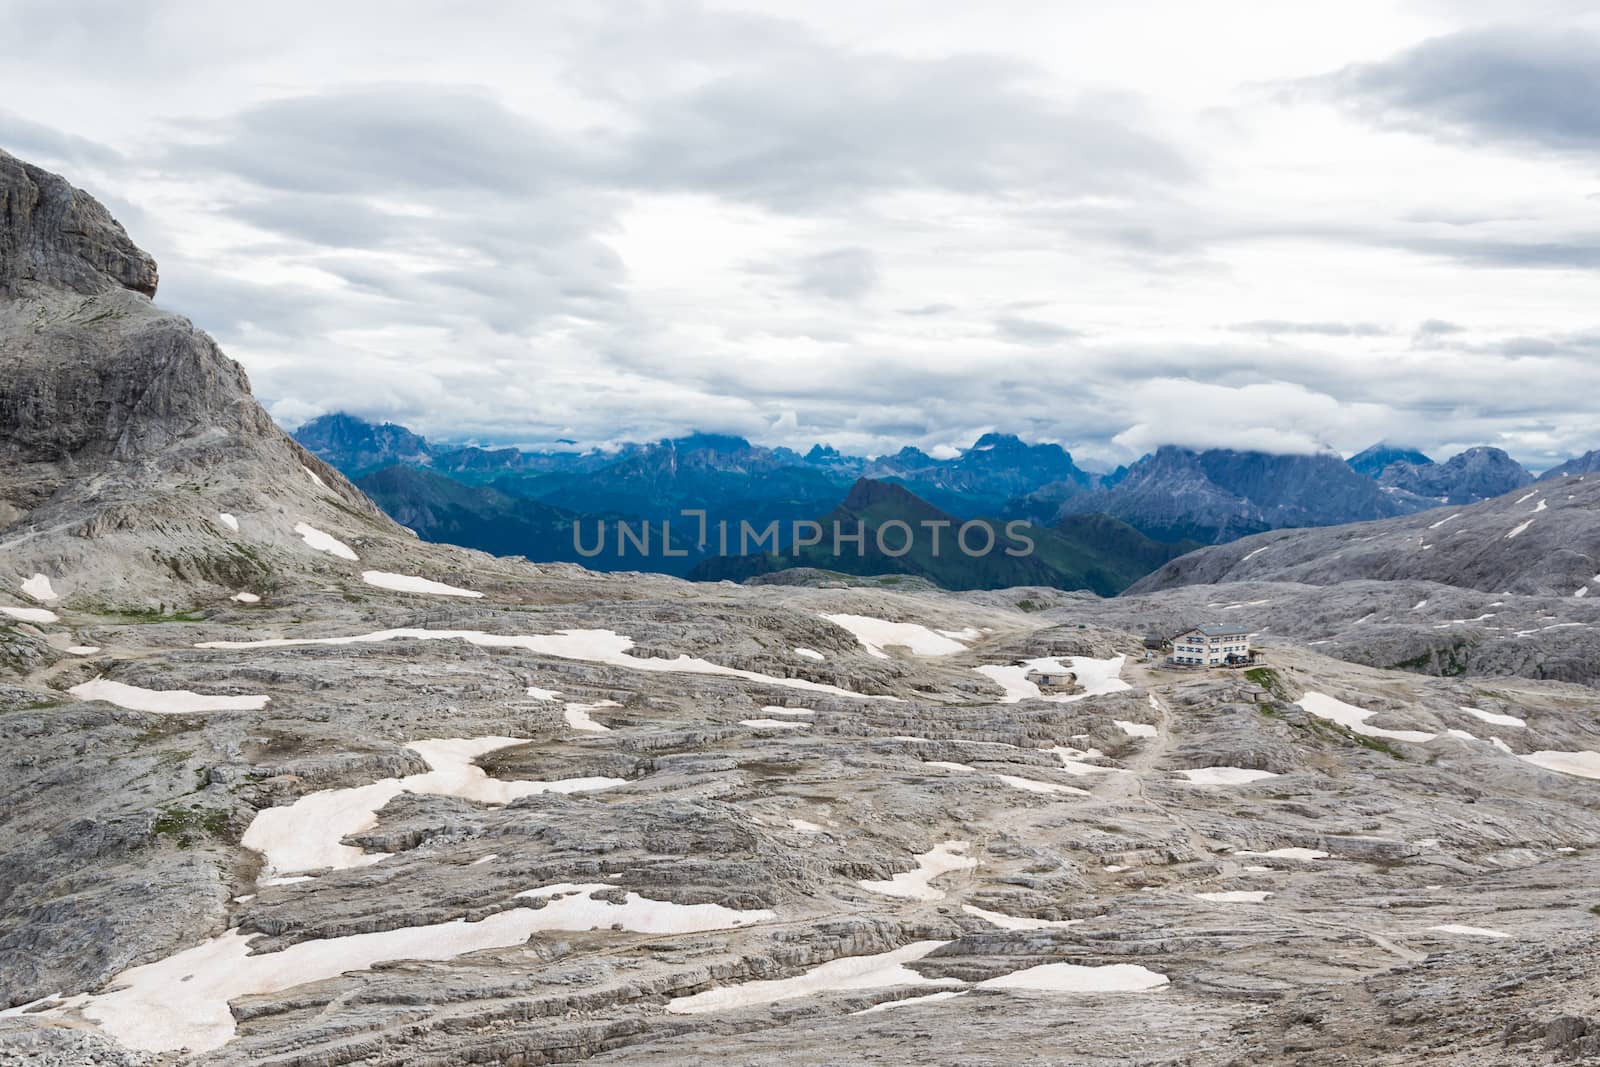 View of a snowfield in the Dolomites by enrico.lapponi